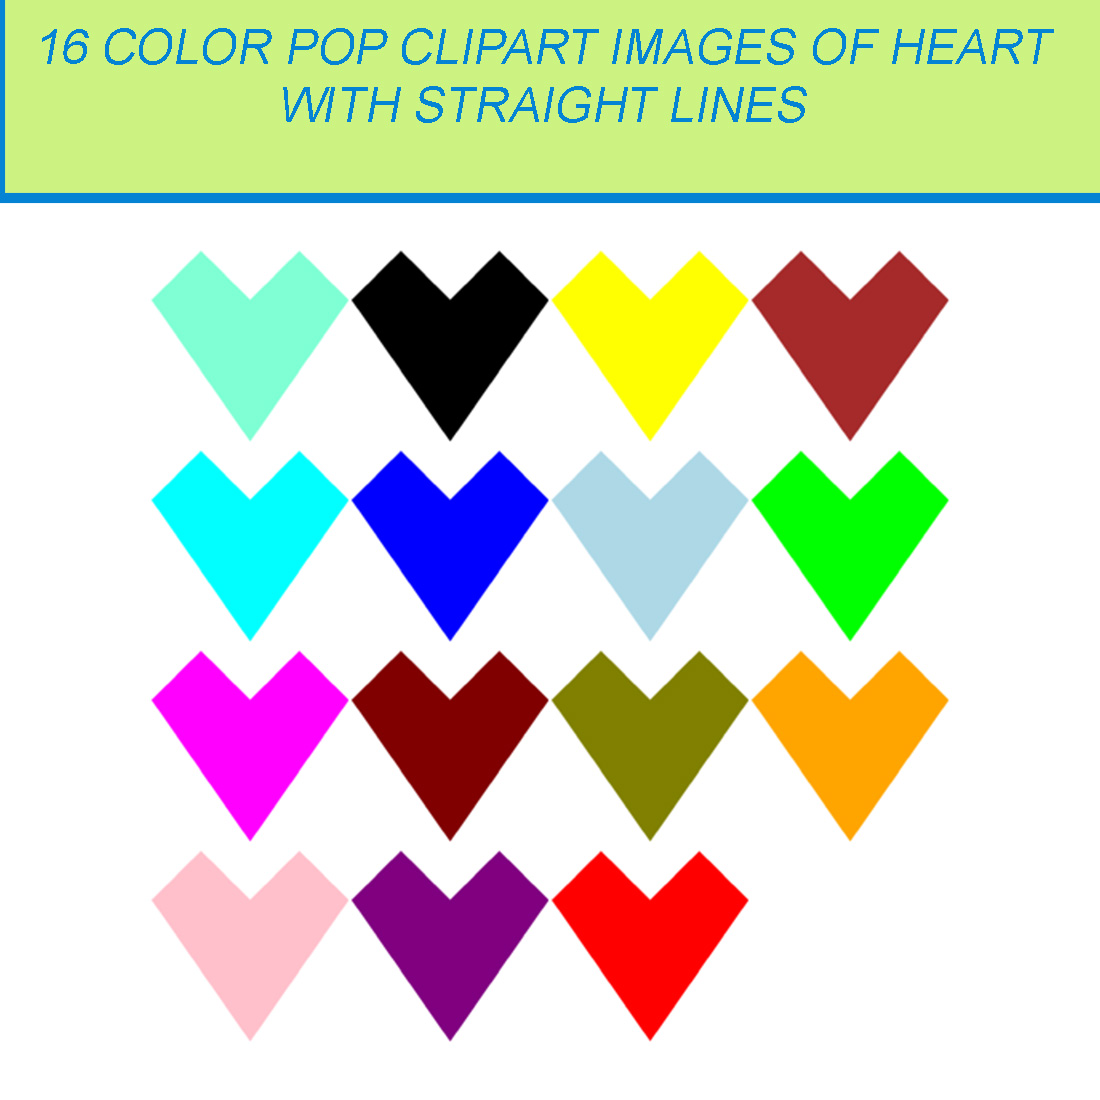 16 COLOR POP CLIPART IMAGES OF HEART STRAIGHT LINES 2 cover image.